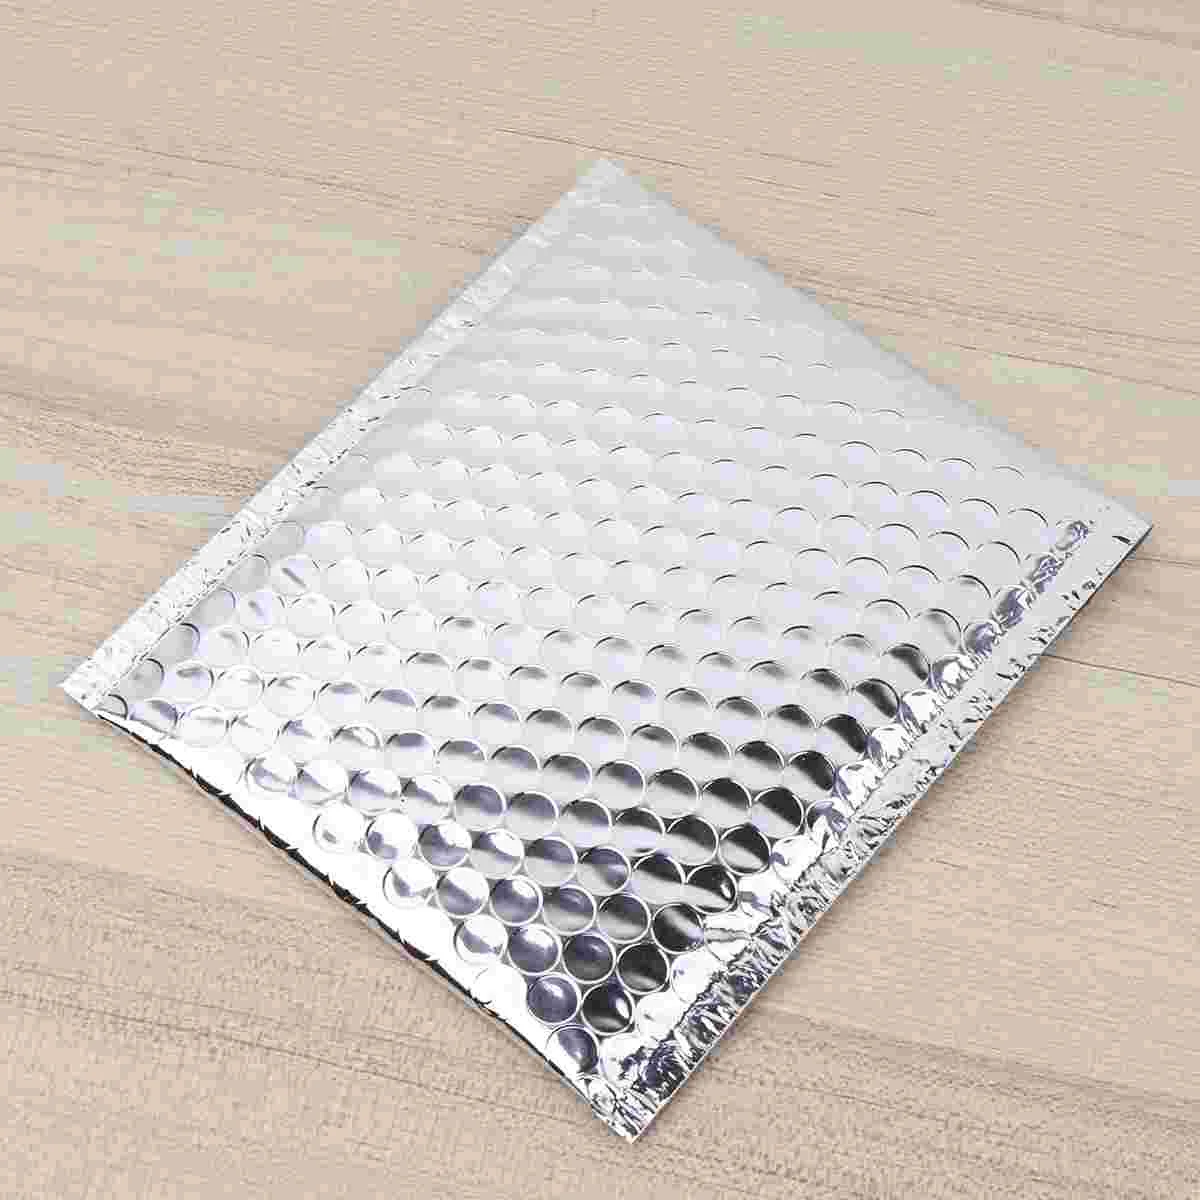 28 Pcs Bubble Bag Shockproof Packaging Metal Small Envelope Waterproof Logistic Express 50 pcs bubble bag storage express delivery packaging shockproof courier pe pouch